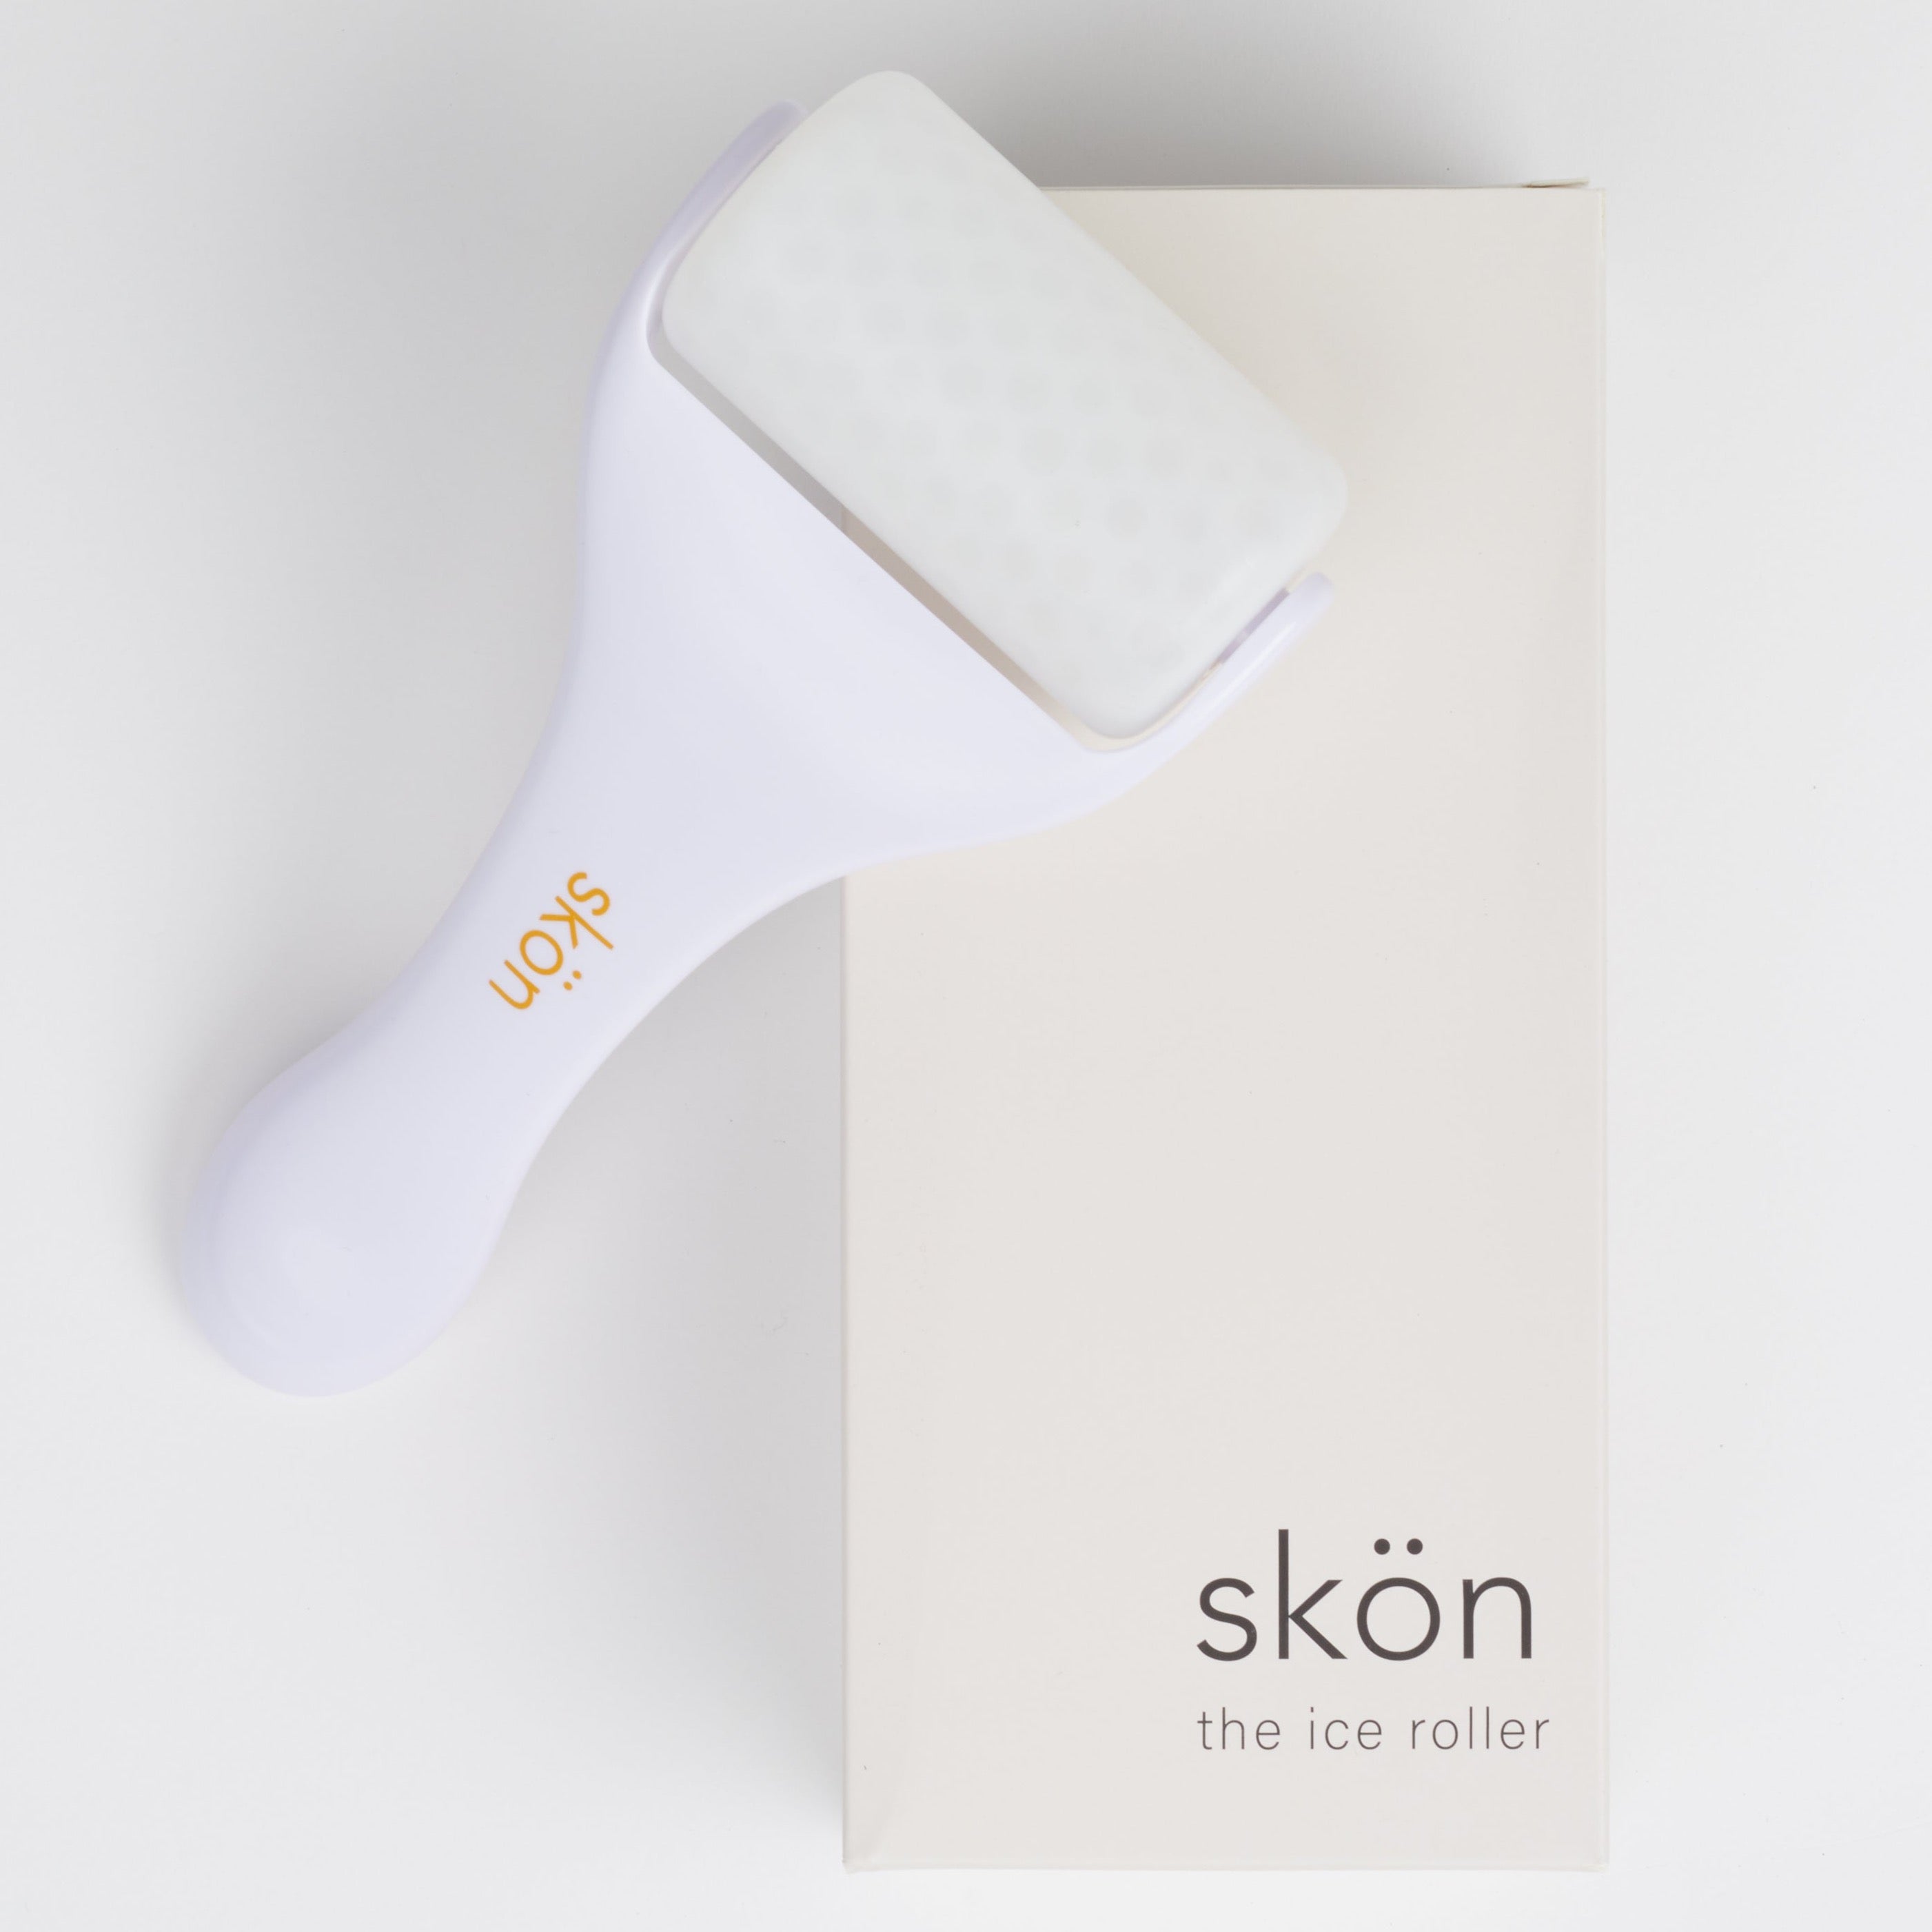 A white ice roller with an tan-orange colored skön logo on the handle sitting atop a cream colored box that says "skön the ice roller" against a white background